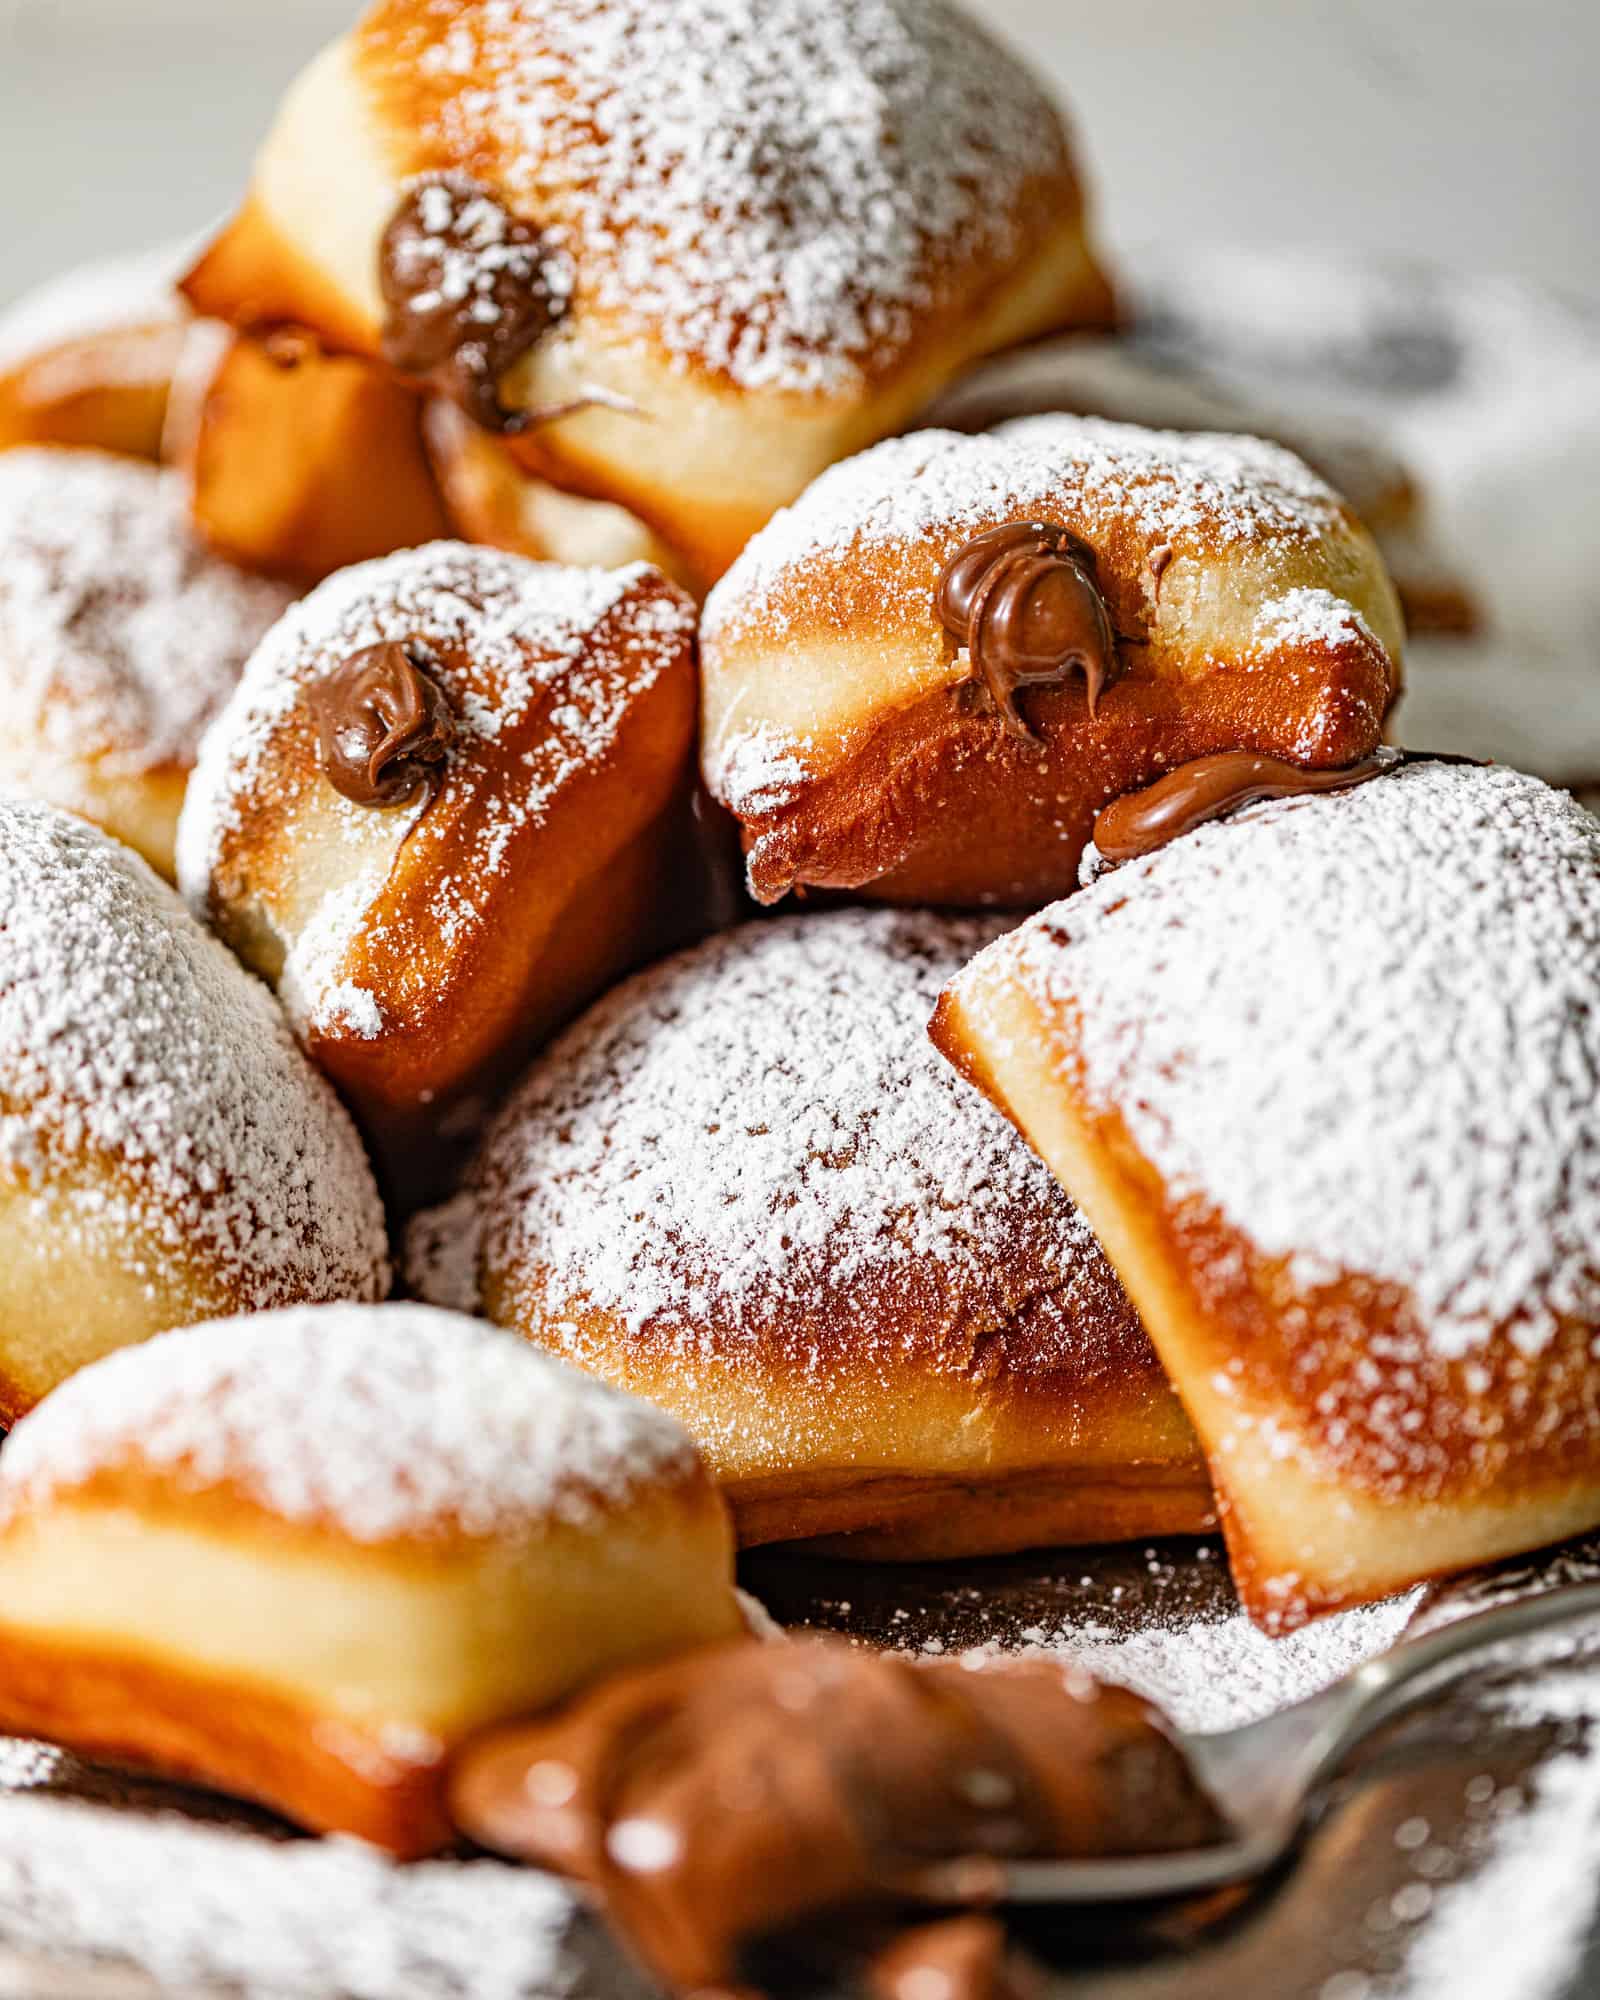 nutella beignets stacked on top of each other and covered in powdered sugar with nutella oozing from the center.